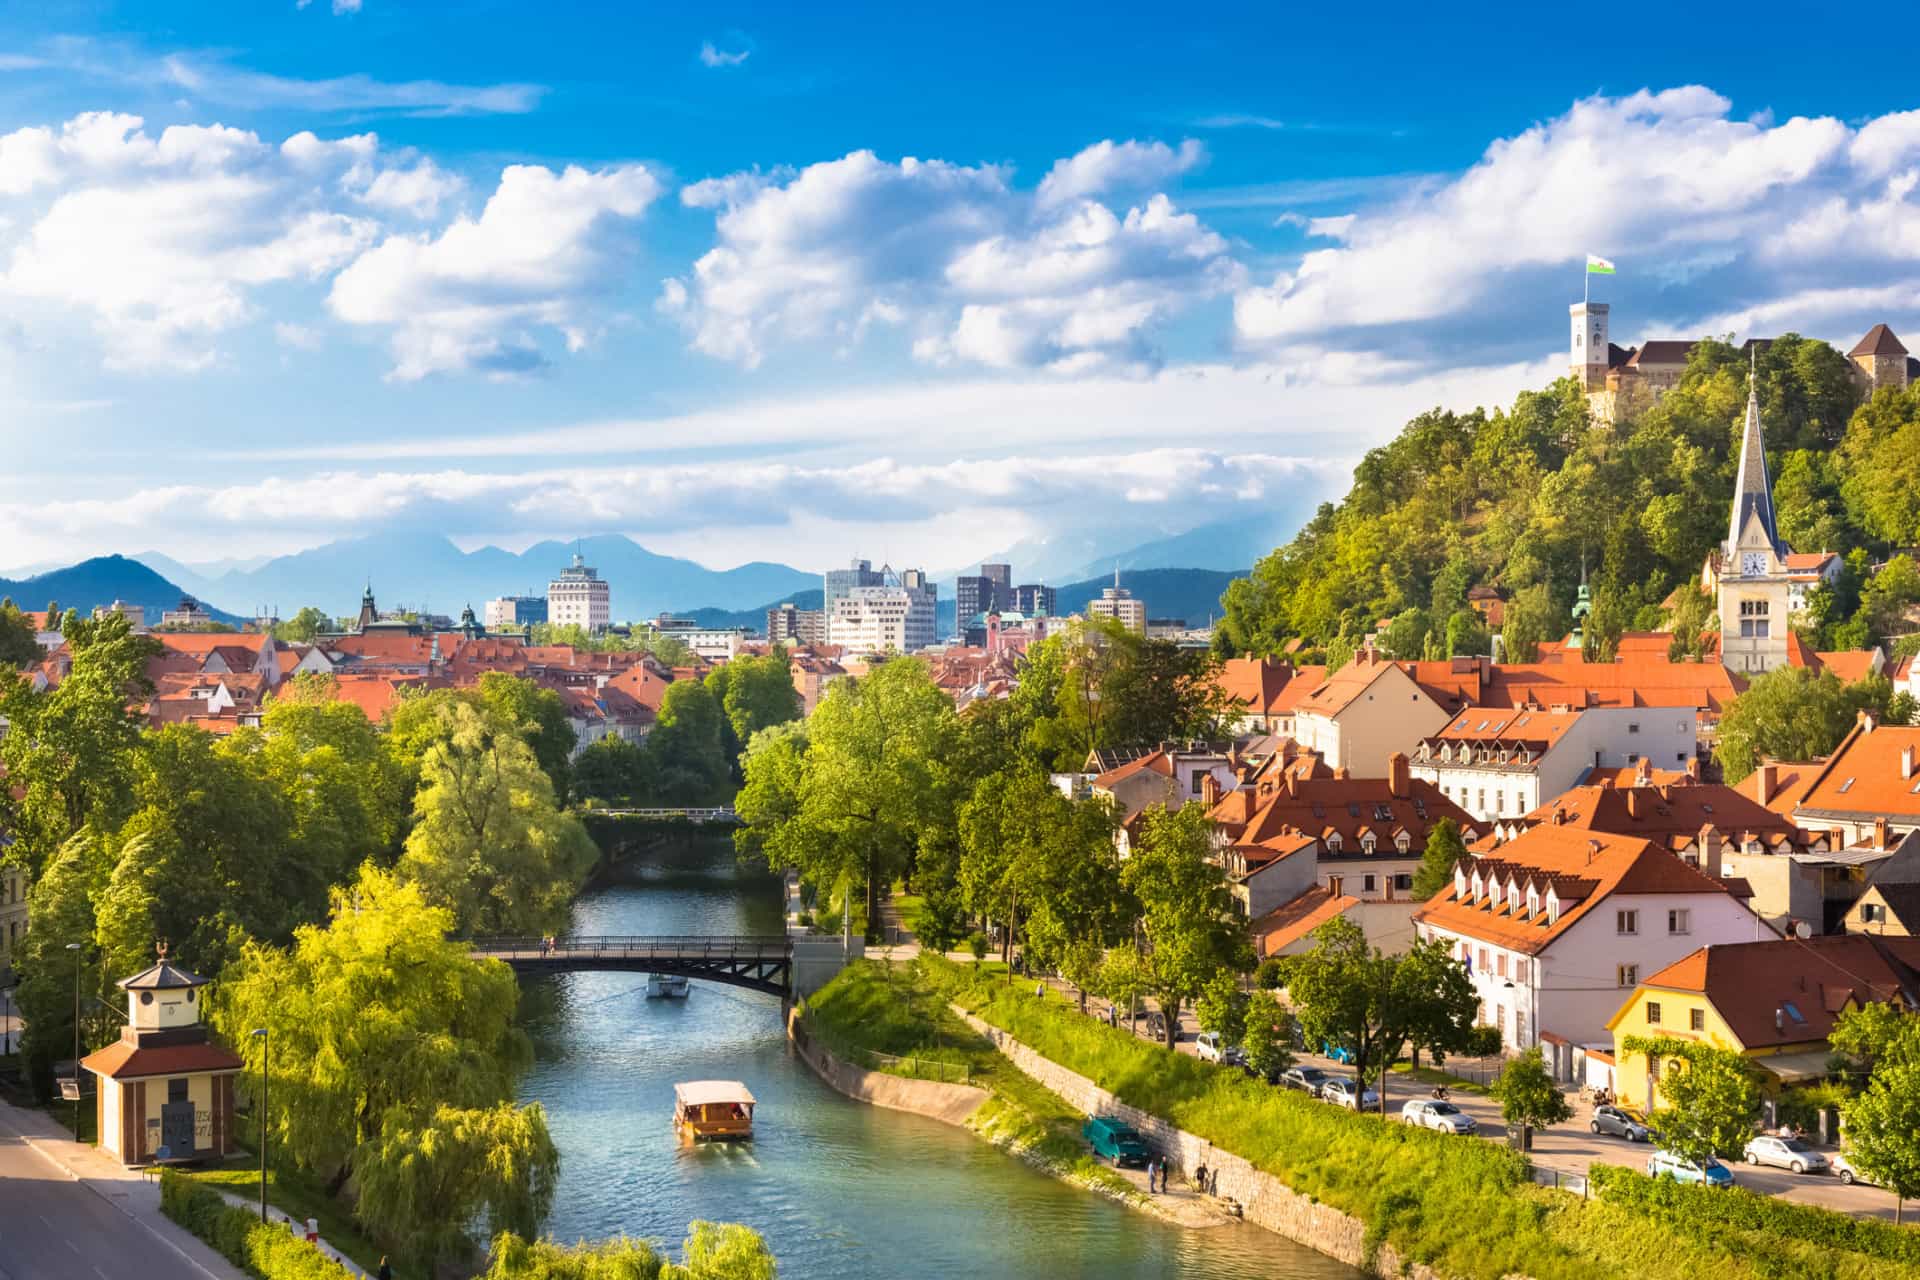 In 1991, Slovenia won independence from Yugoslavia. Ljubljana, the capital, stands on the site of a Roman city called Emona.